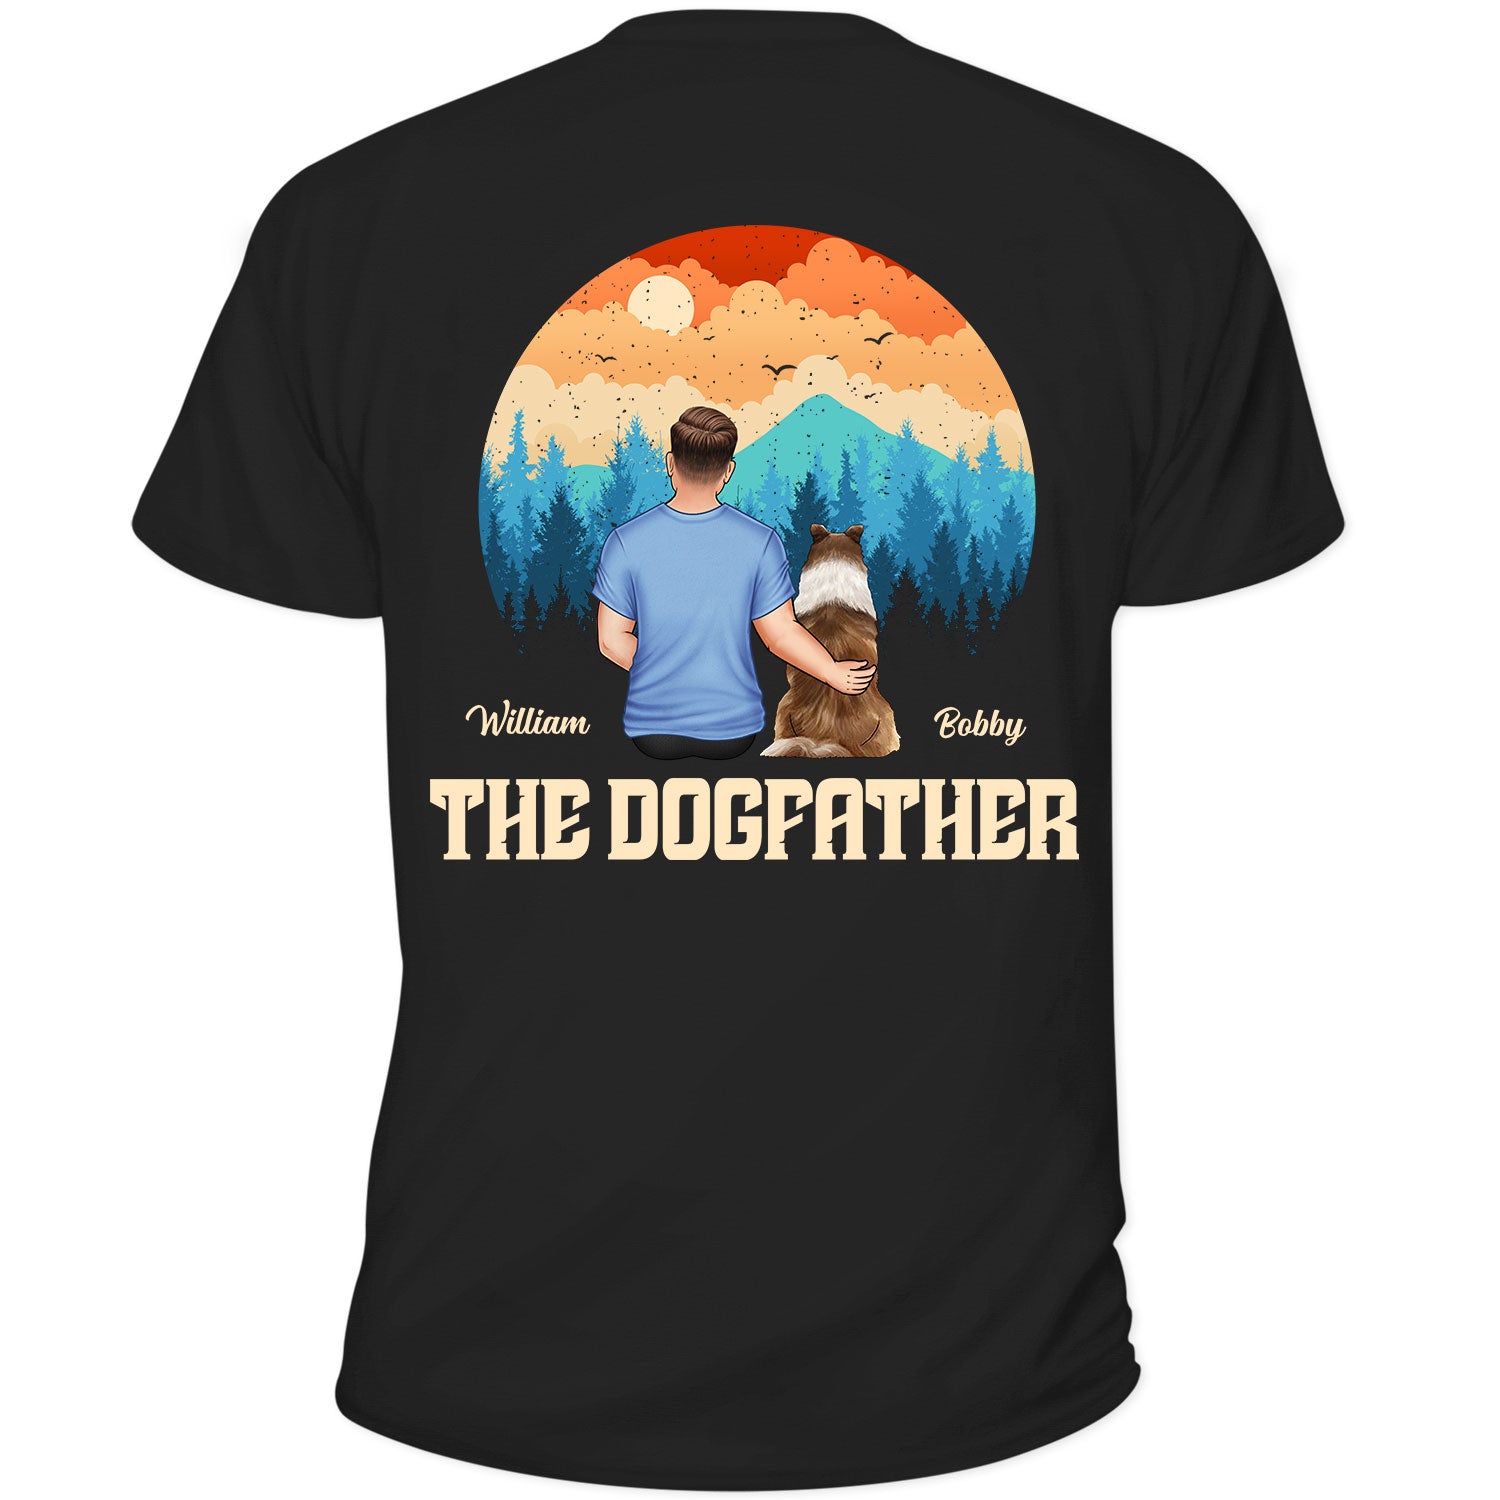 The Dogfather - Personalized T Shirt